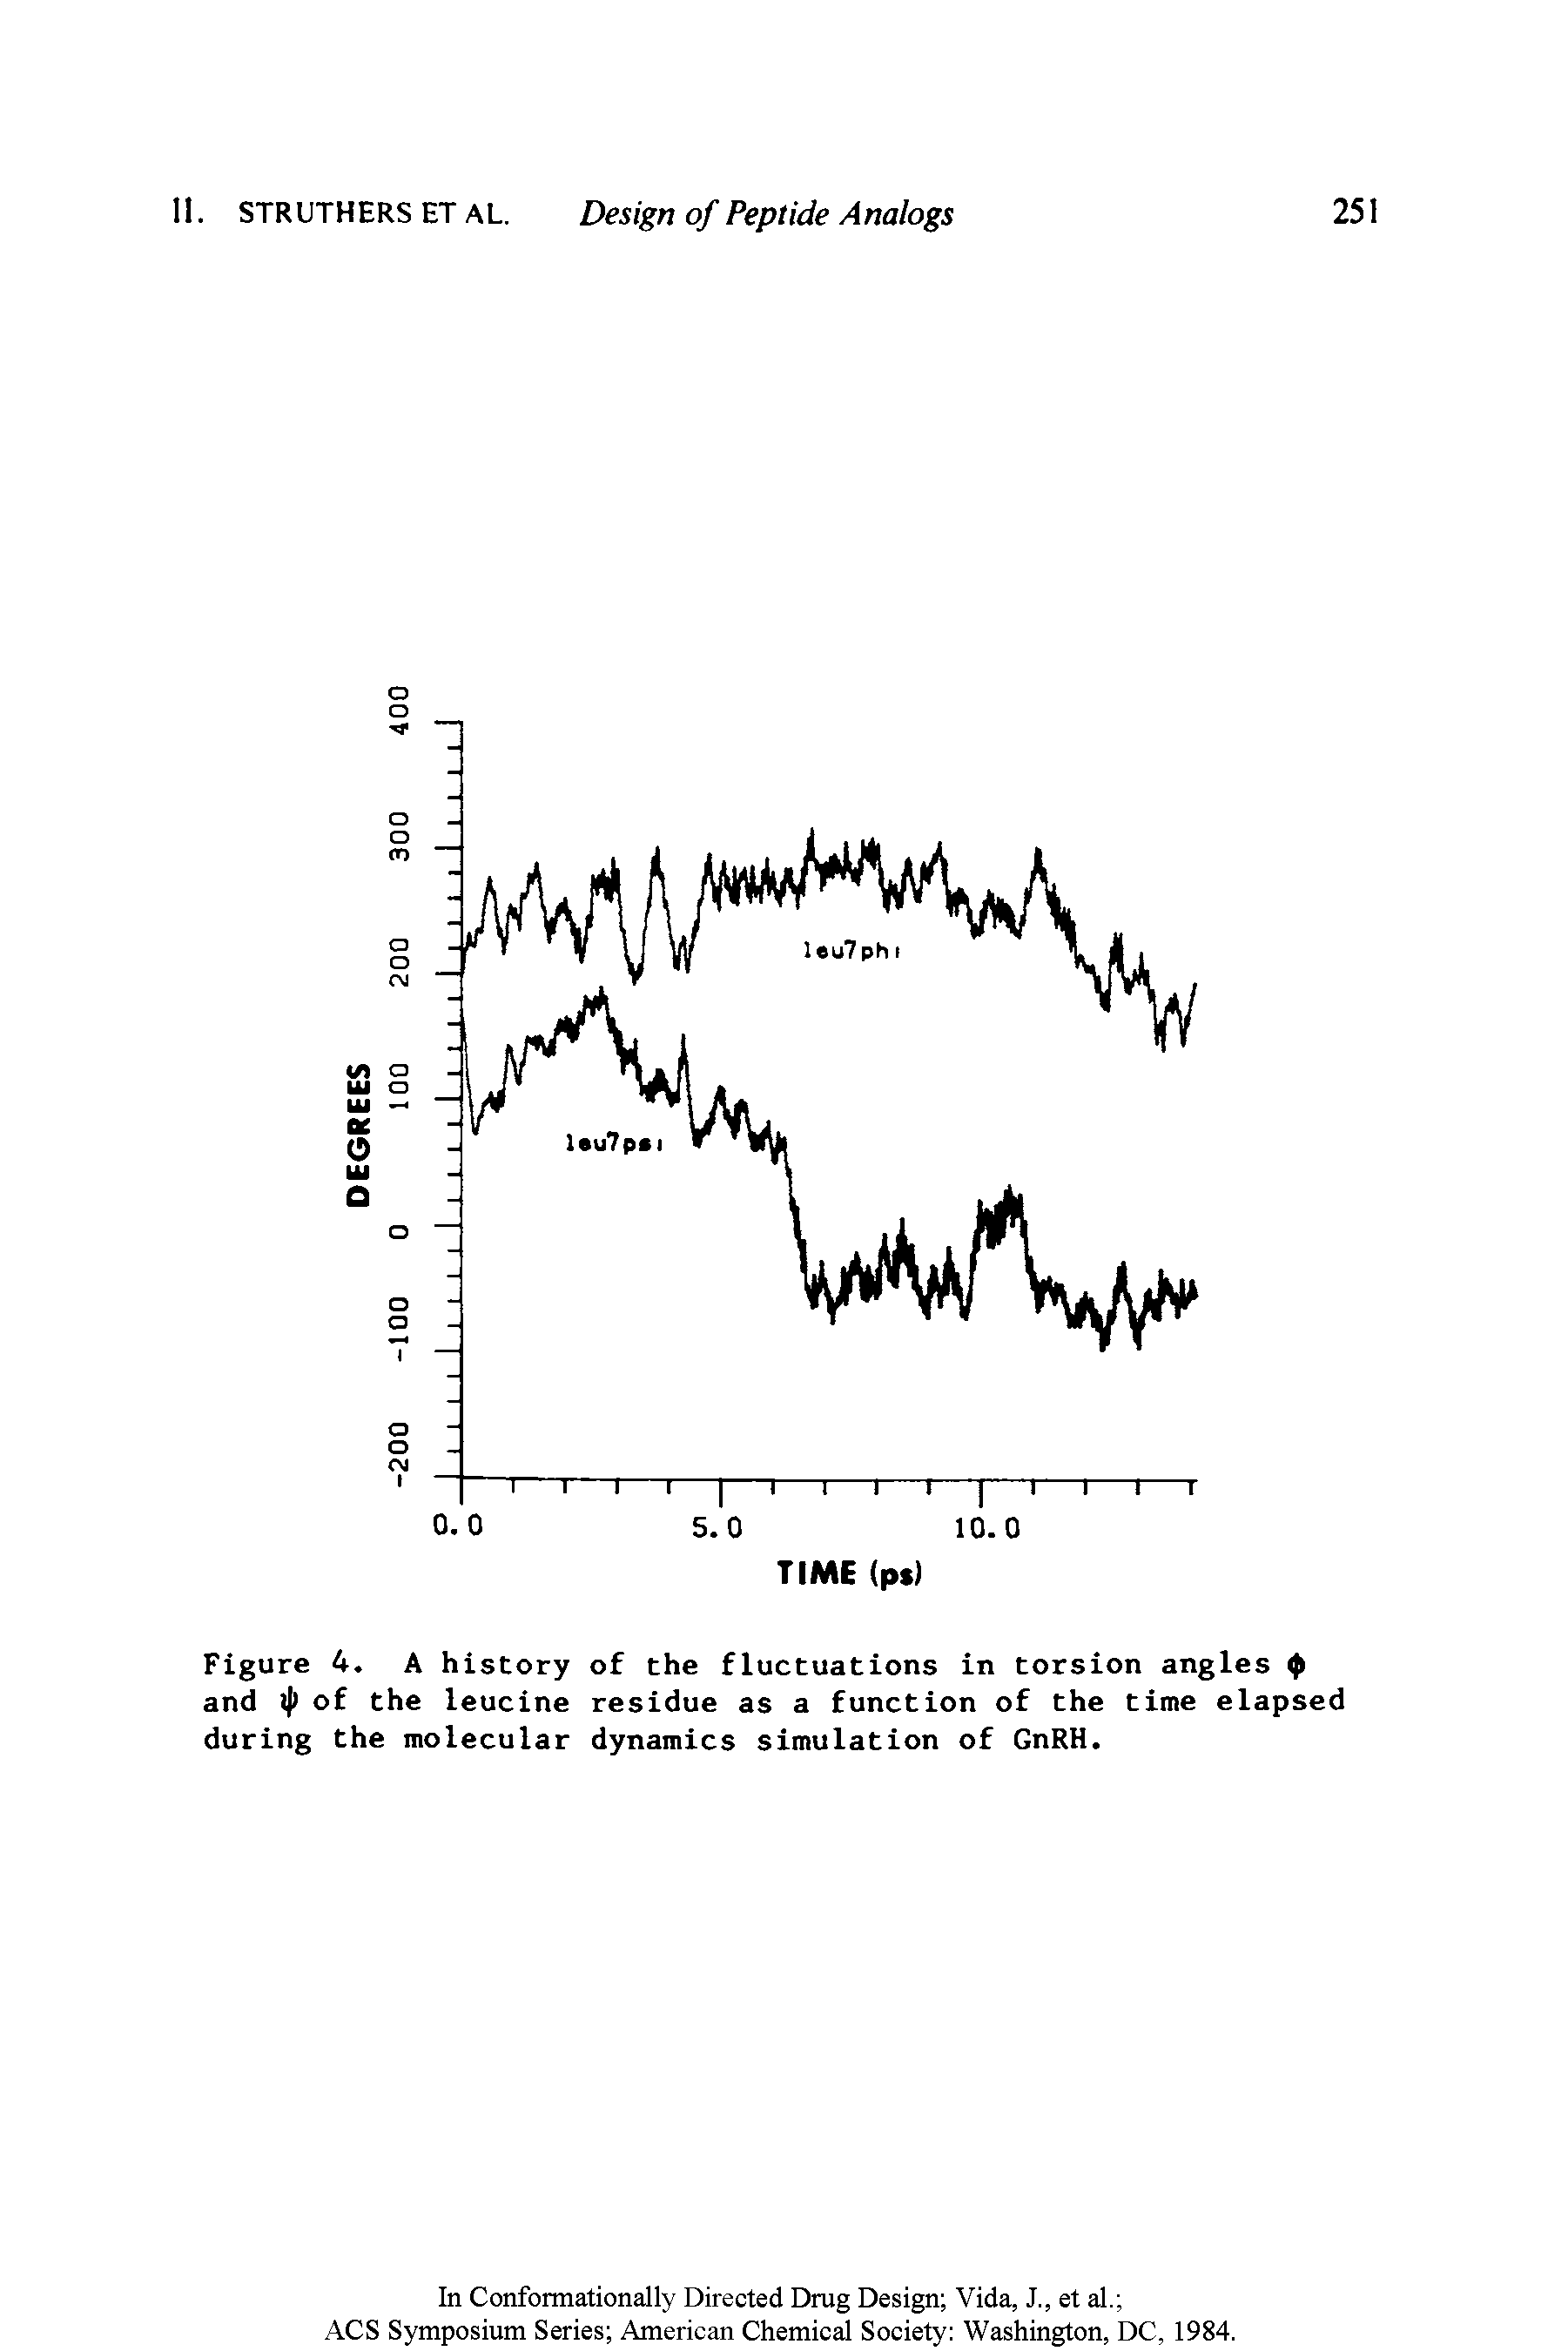 Figure 4. A history of the fluctuations in torsion angles 0 and of the leucine residue as a function of the time elapsed during the molecular dynamics simulation of GnRH.